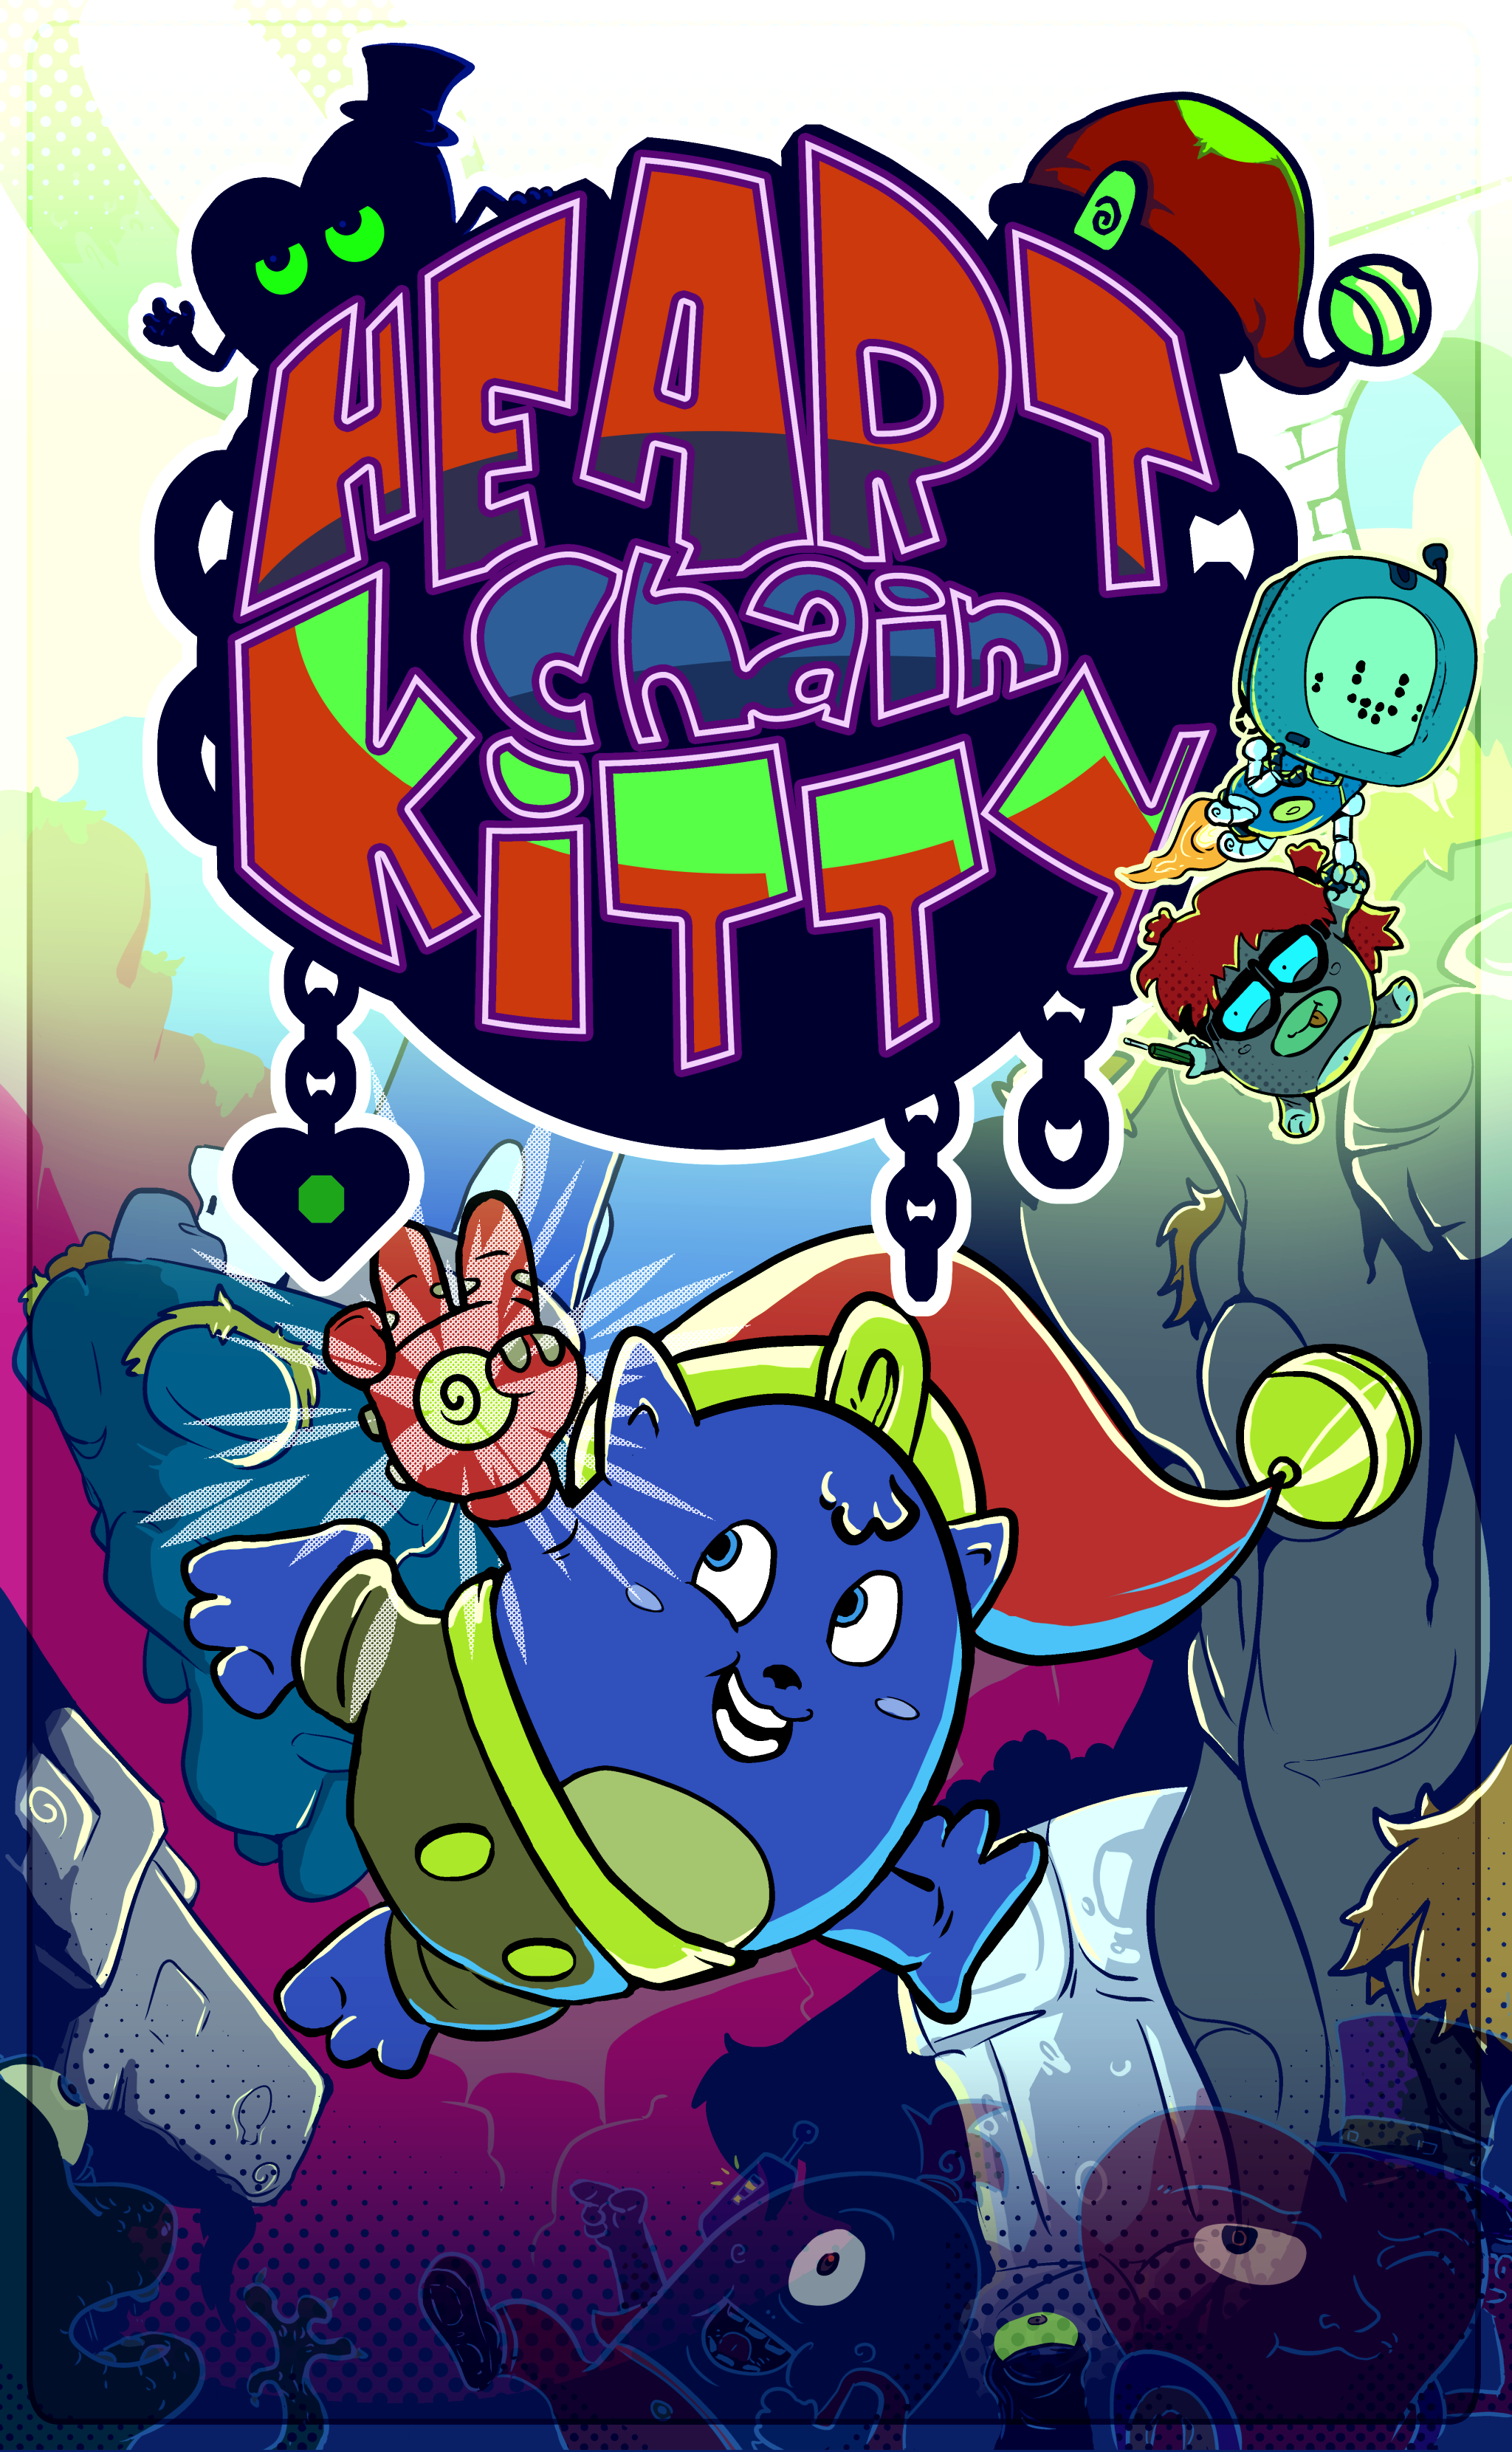 Heart Chain Kitty: All Screwed Up - Metacritic